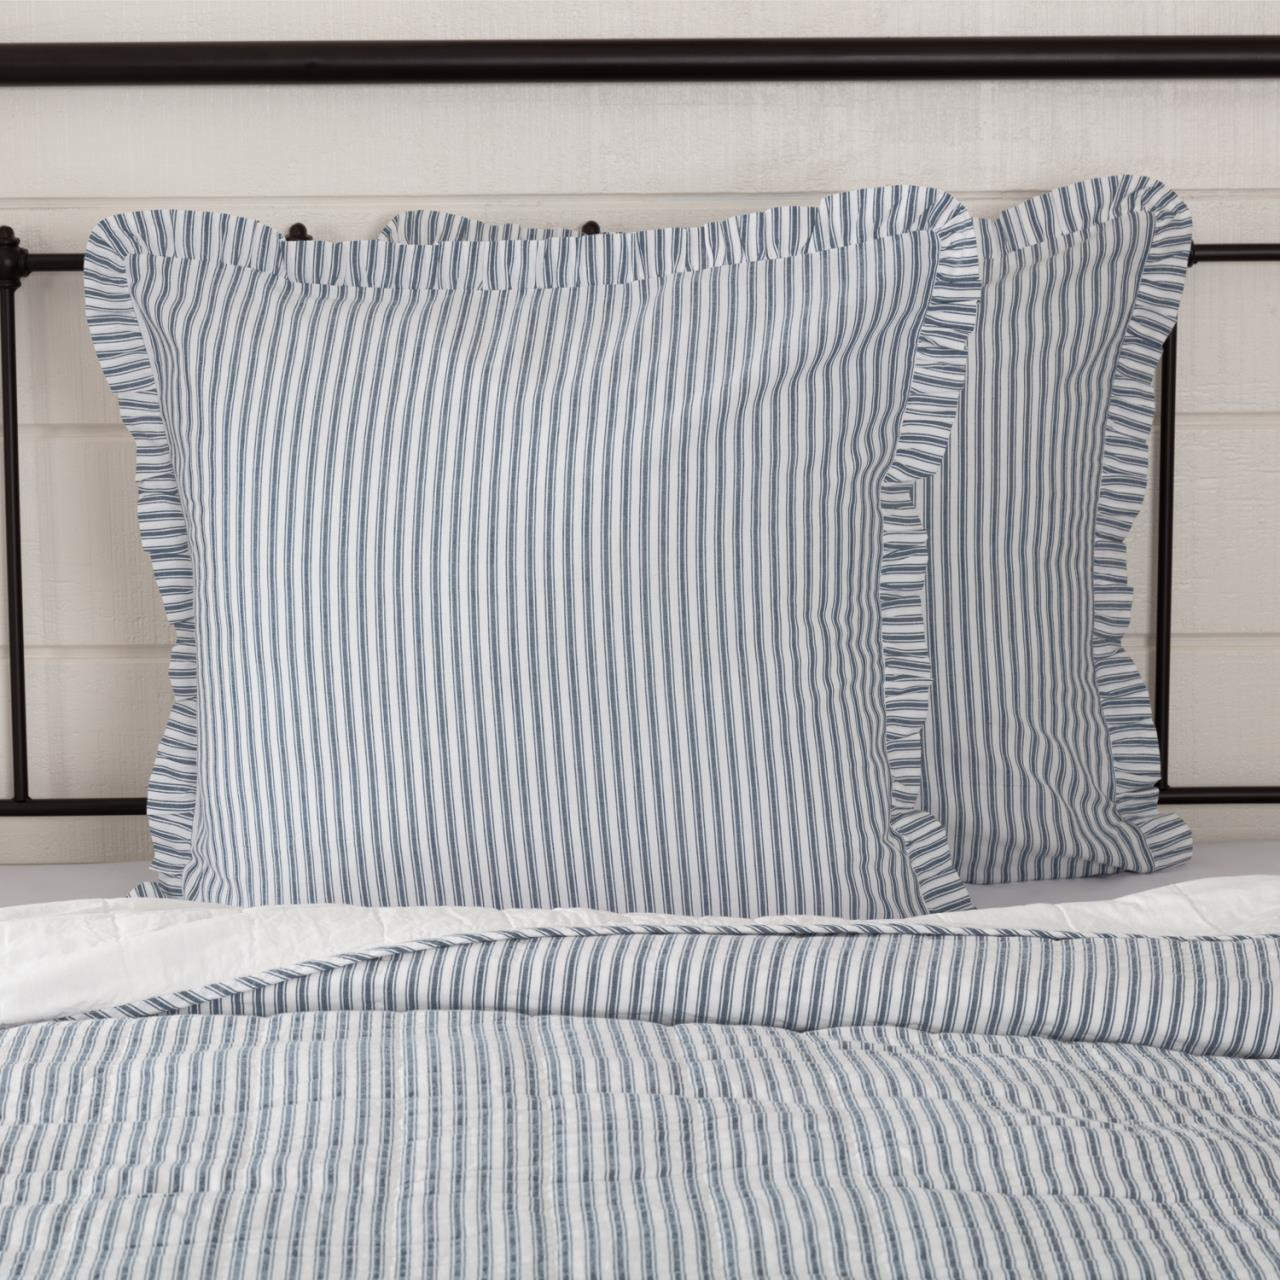 Details about   VHC Brands Sawyer Mill Farmhouse Charcoal Ticking Stripe King Sham 21x37" 